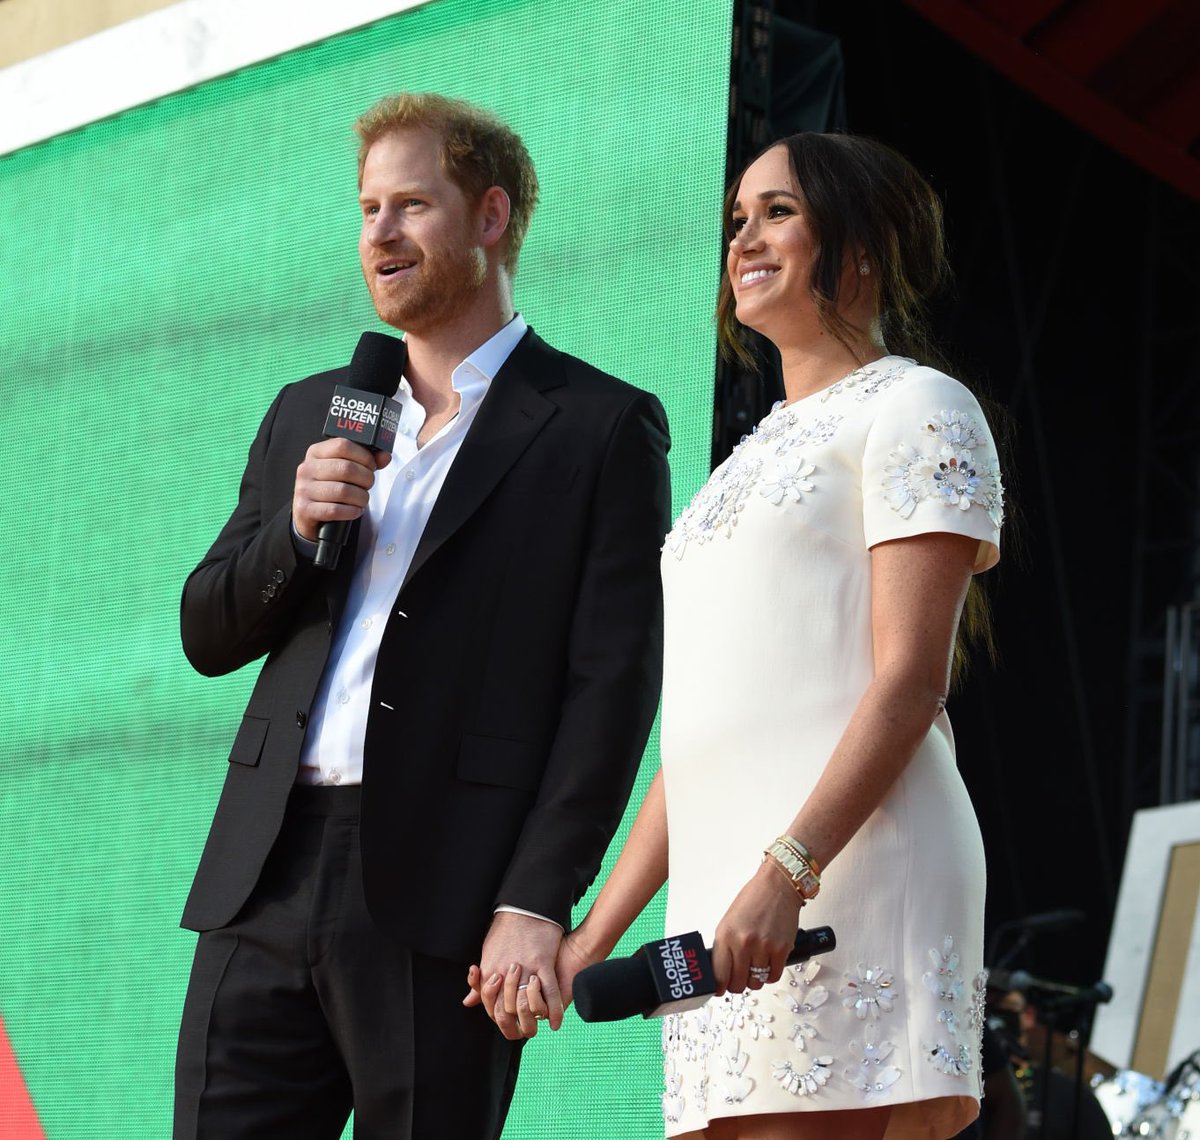 Glowing #HarryAndMeghan in NYC.

“My wife and I believe that where you are born should not dictate your ability to survive.” – Prince Harry,   The Duke of Sussex #GlobalCitizenLive 

#HarryAndMeghanInNYC #SussesxSquad #LoveWins #GetVaxxed